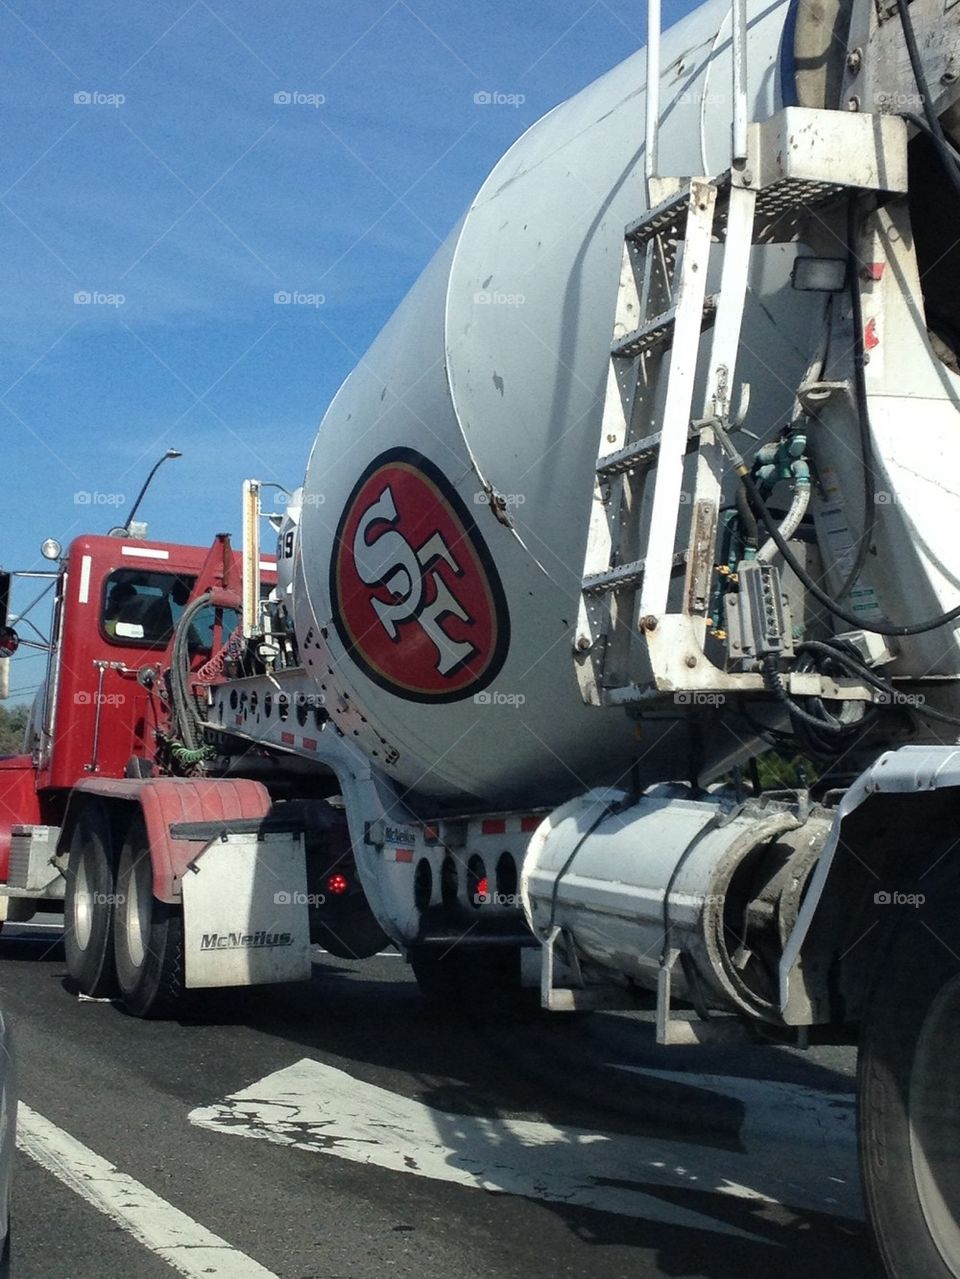 NINERS cement truck